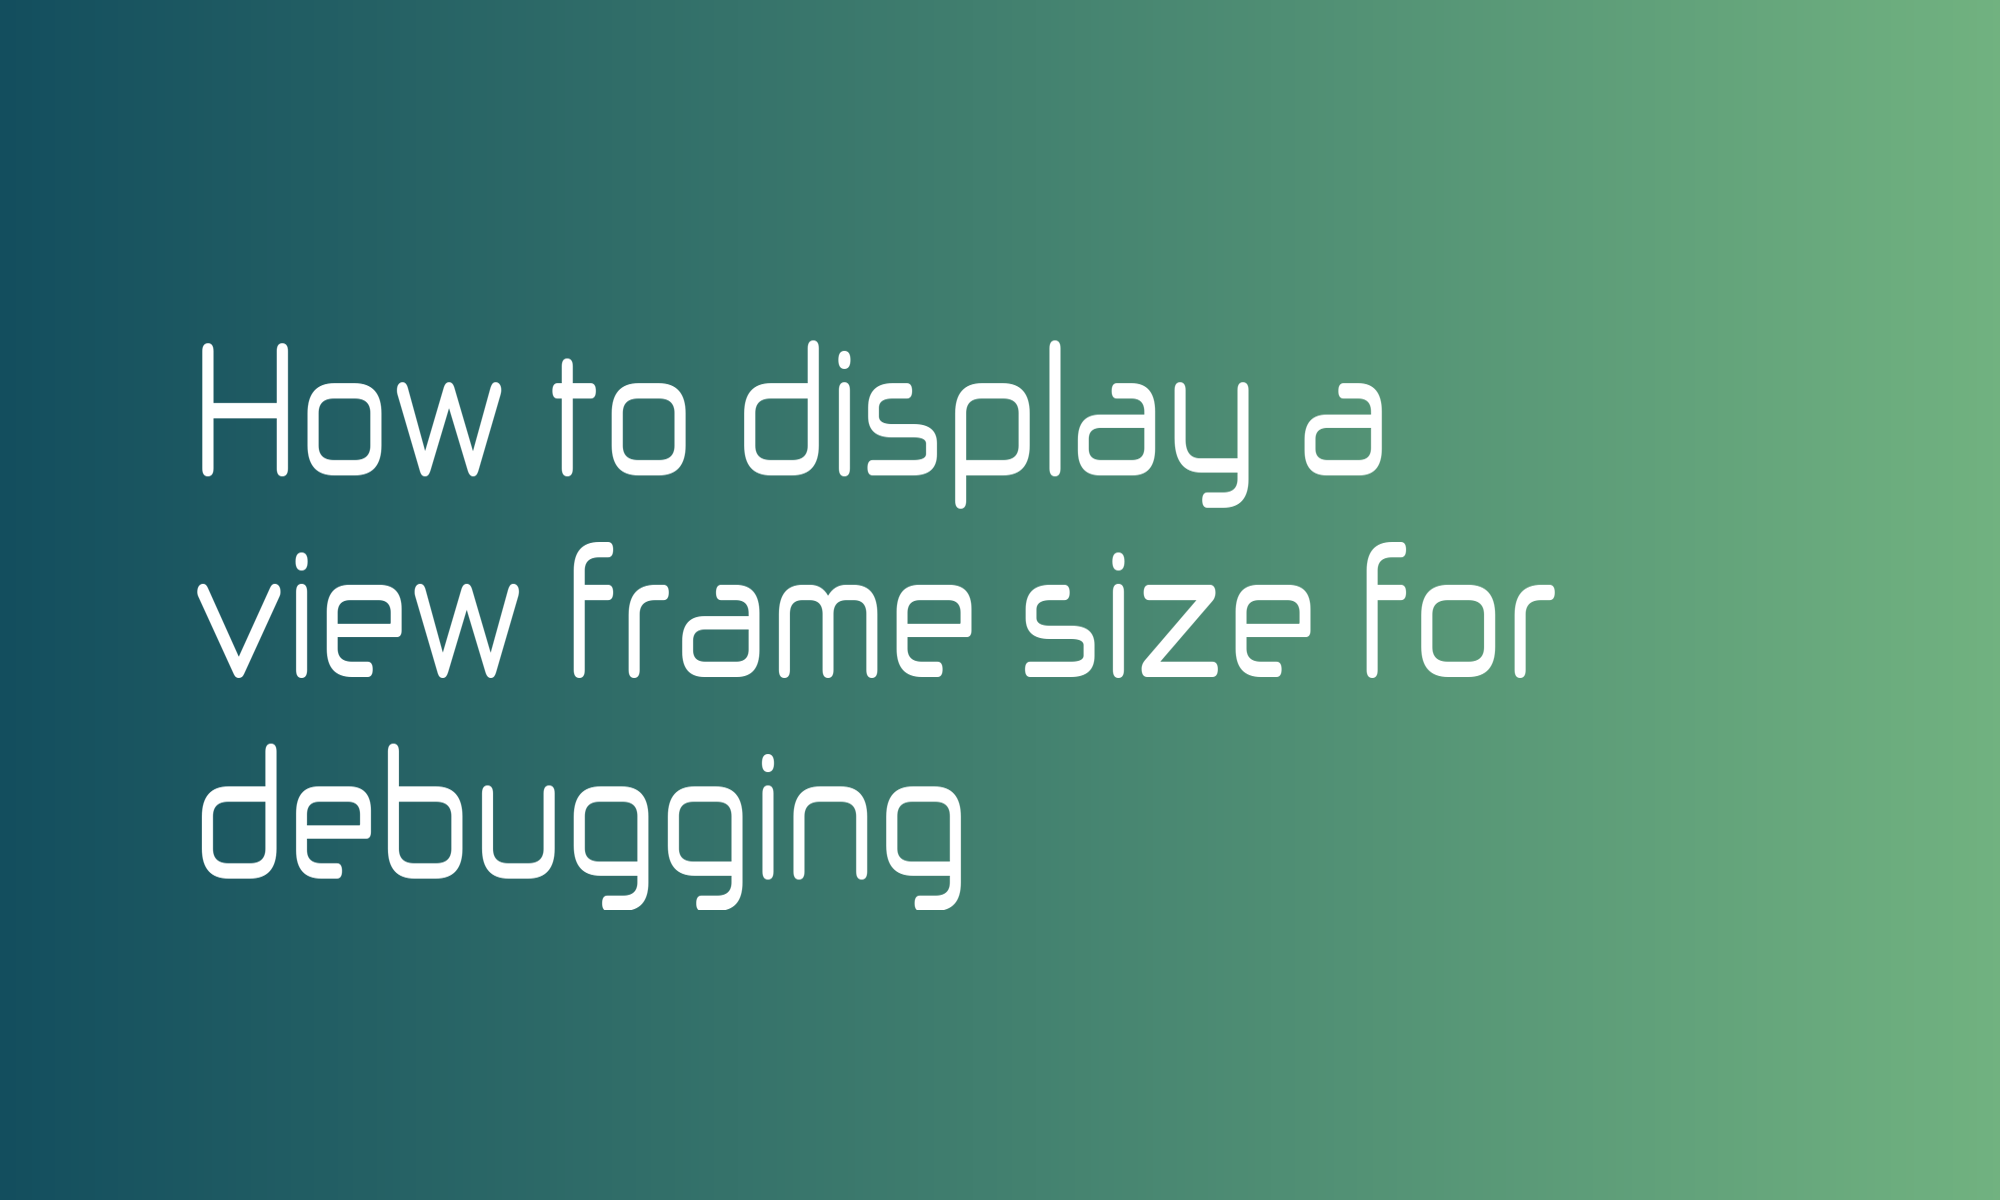 How to display a view frame size for debugging